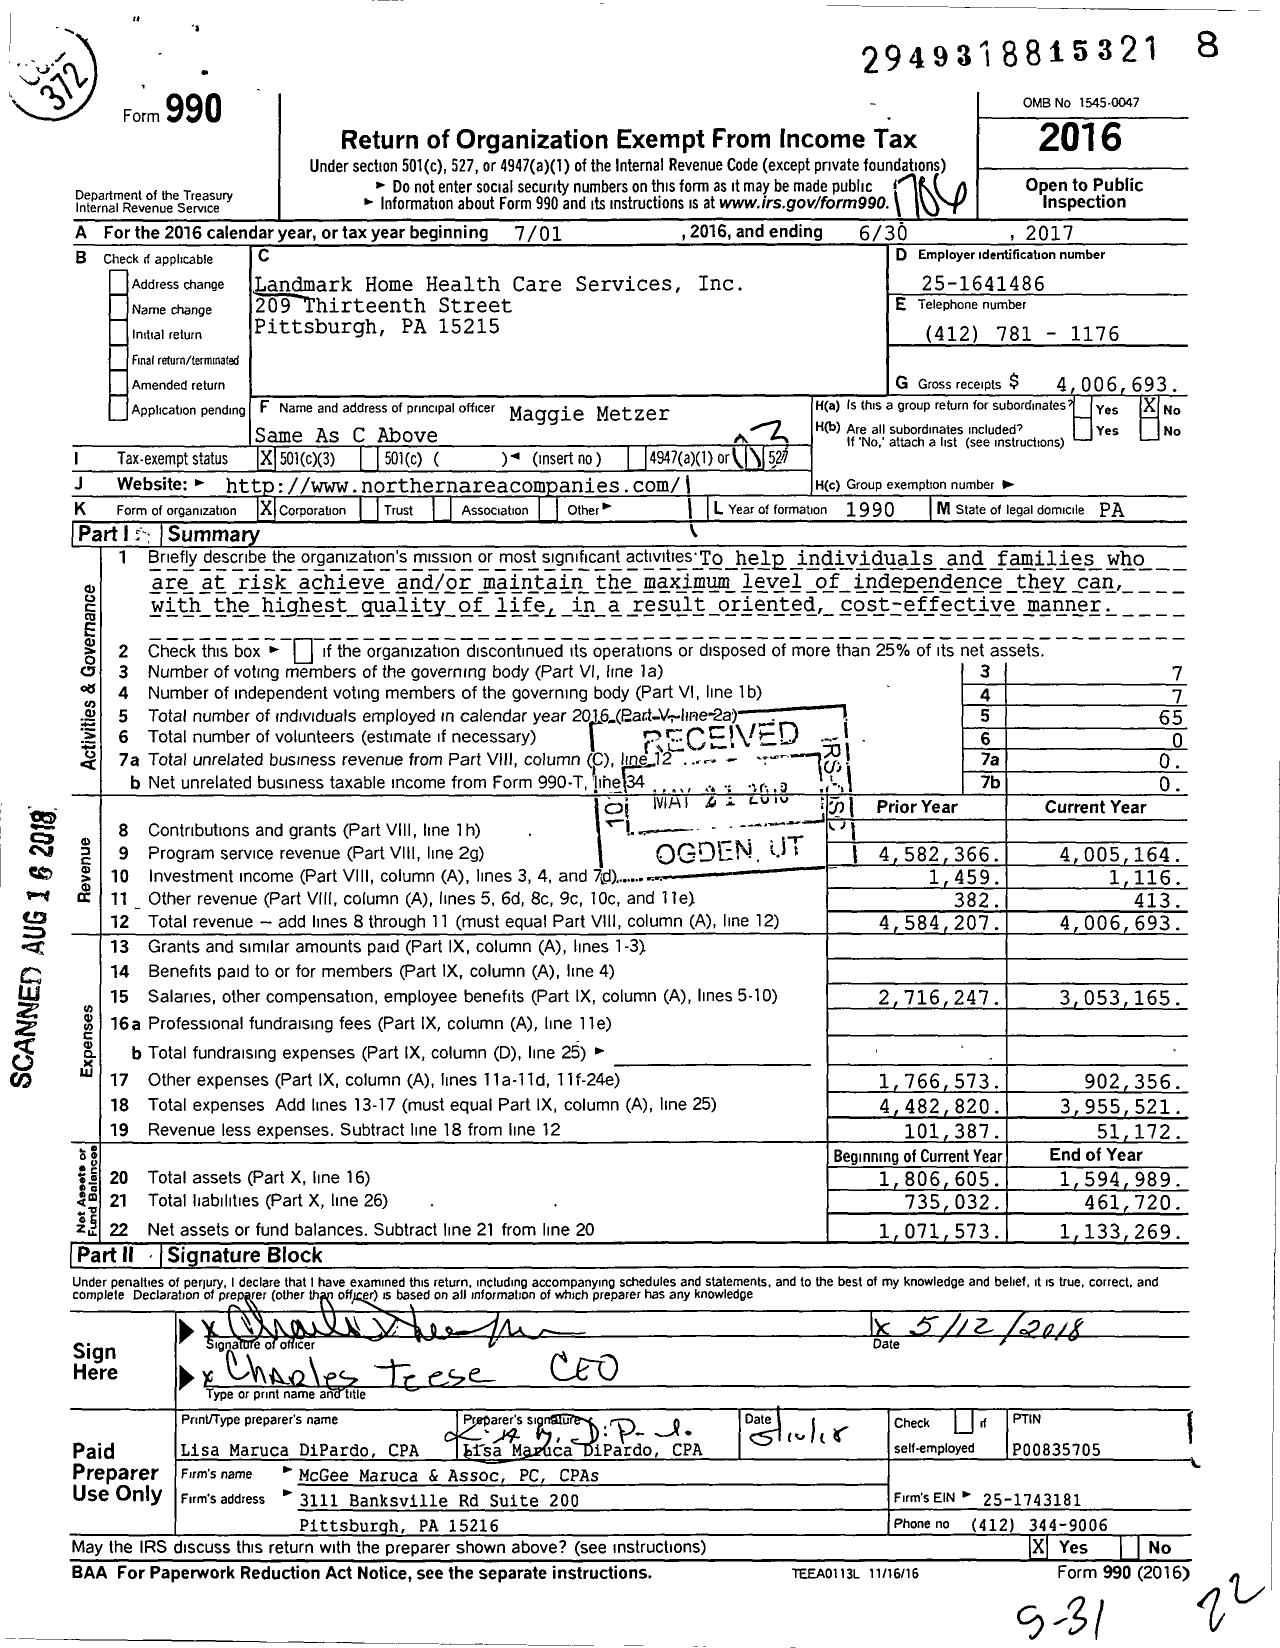 Image of first page of 2016 Form 990 for Landmark Home Health Care Services